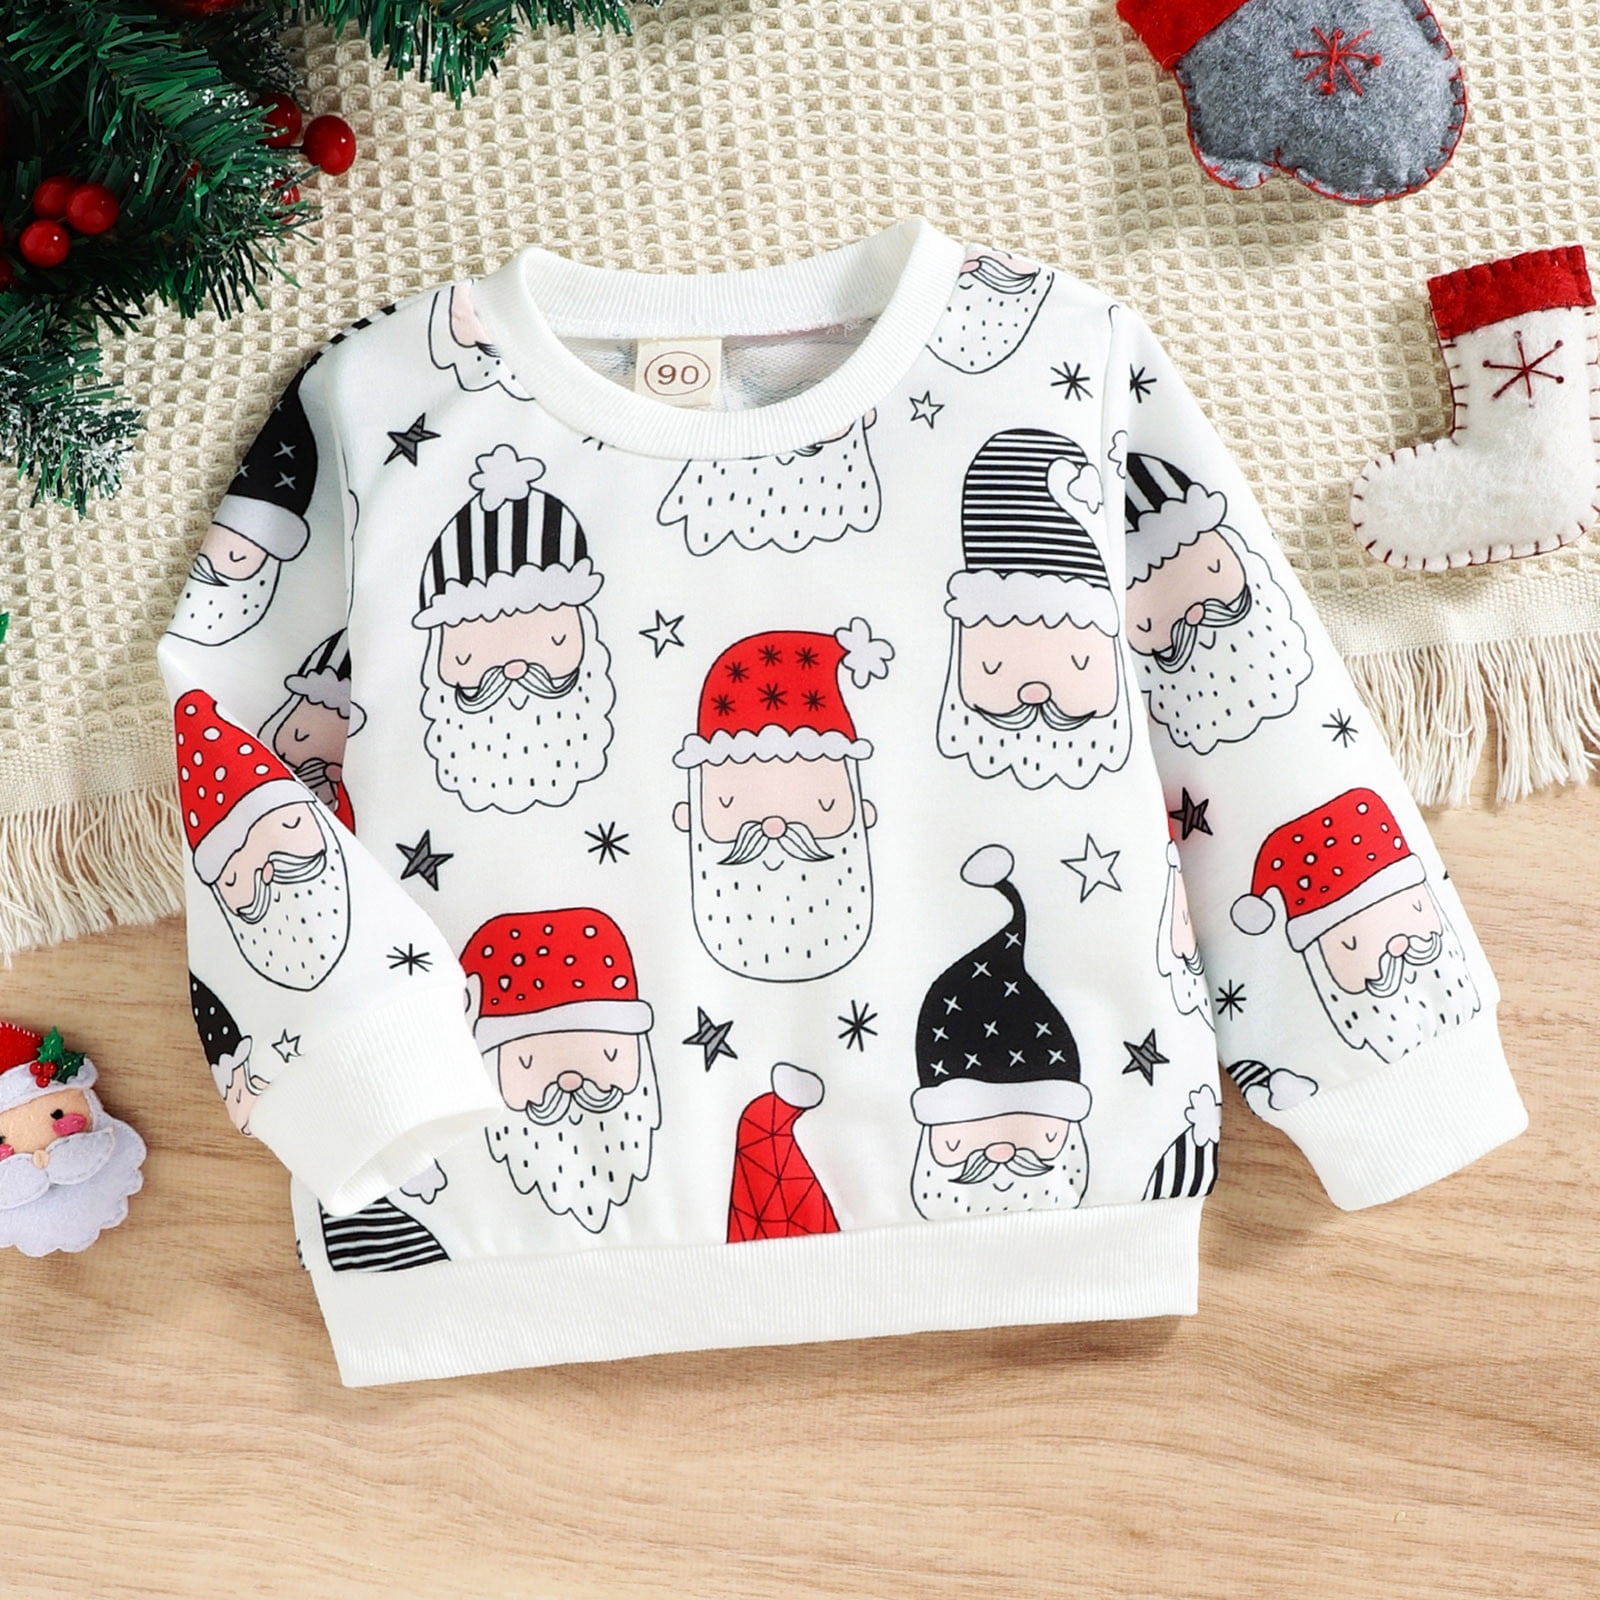 TOWED22 Christmas Sweatshirts For Toddler Girls,Toddler Kids Baby Christmas Clothes Sleeve Letter Printed Pullover Top Crew Neck Fall,White - Walmart.com